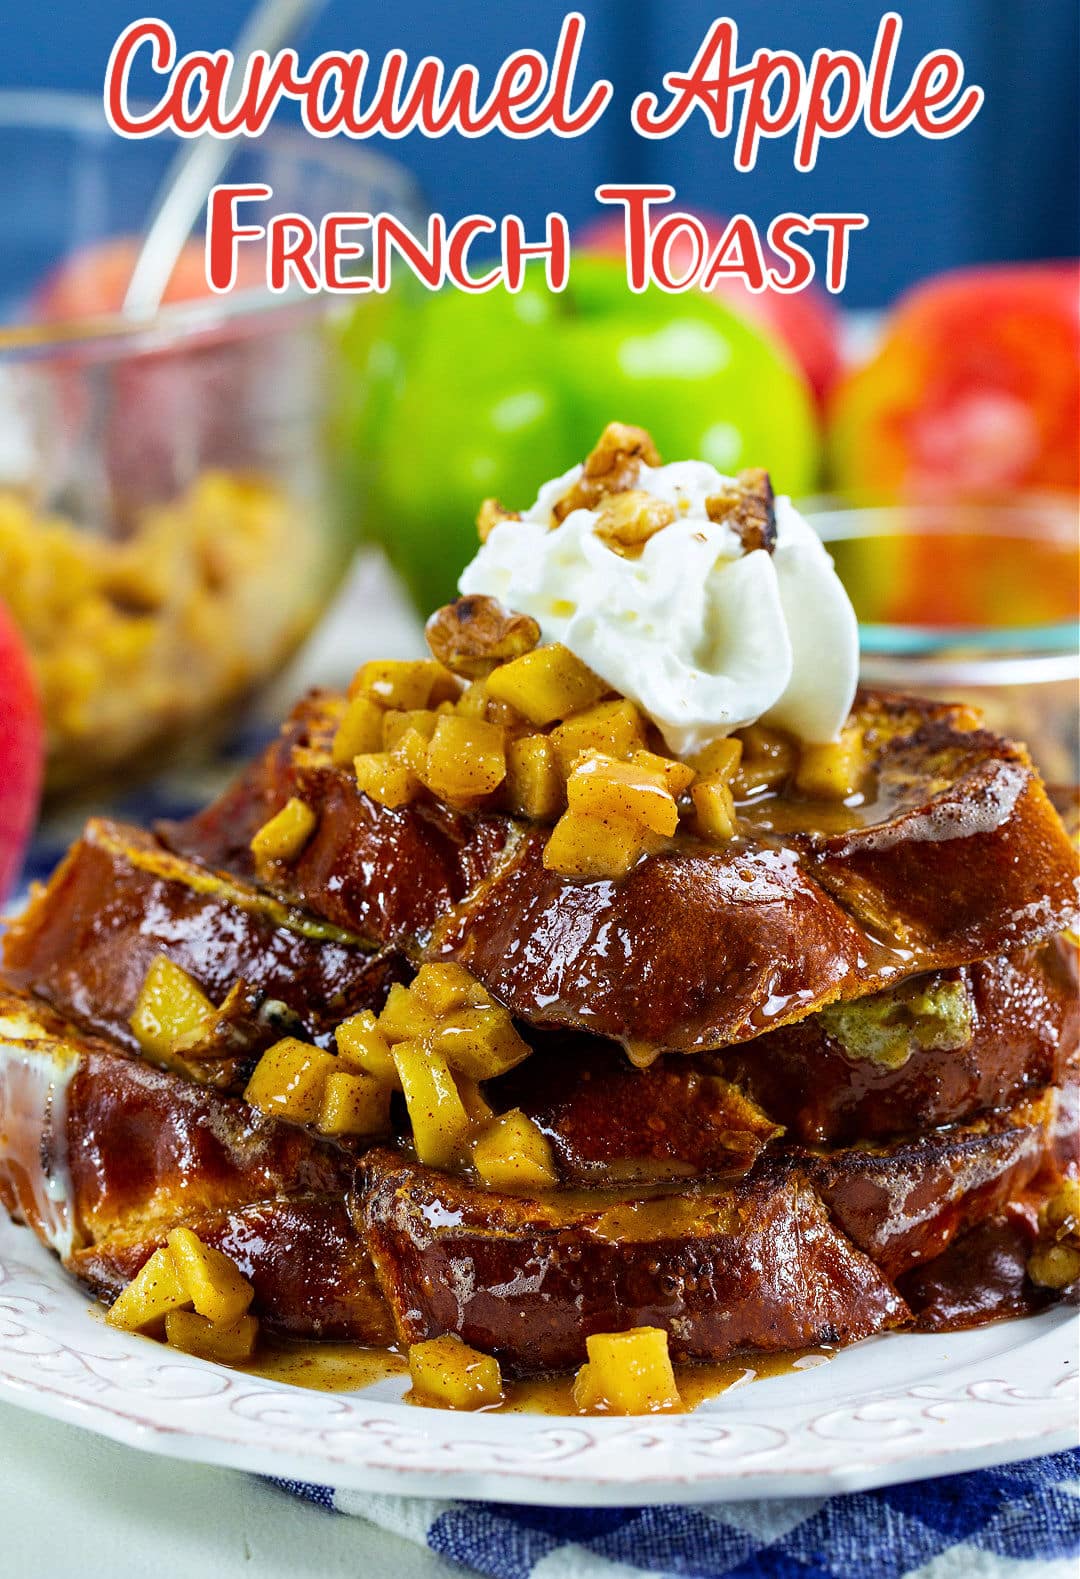 Caramel Apple French Toast piled up on a plate.